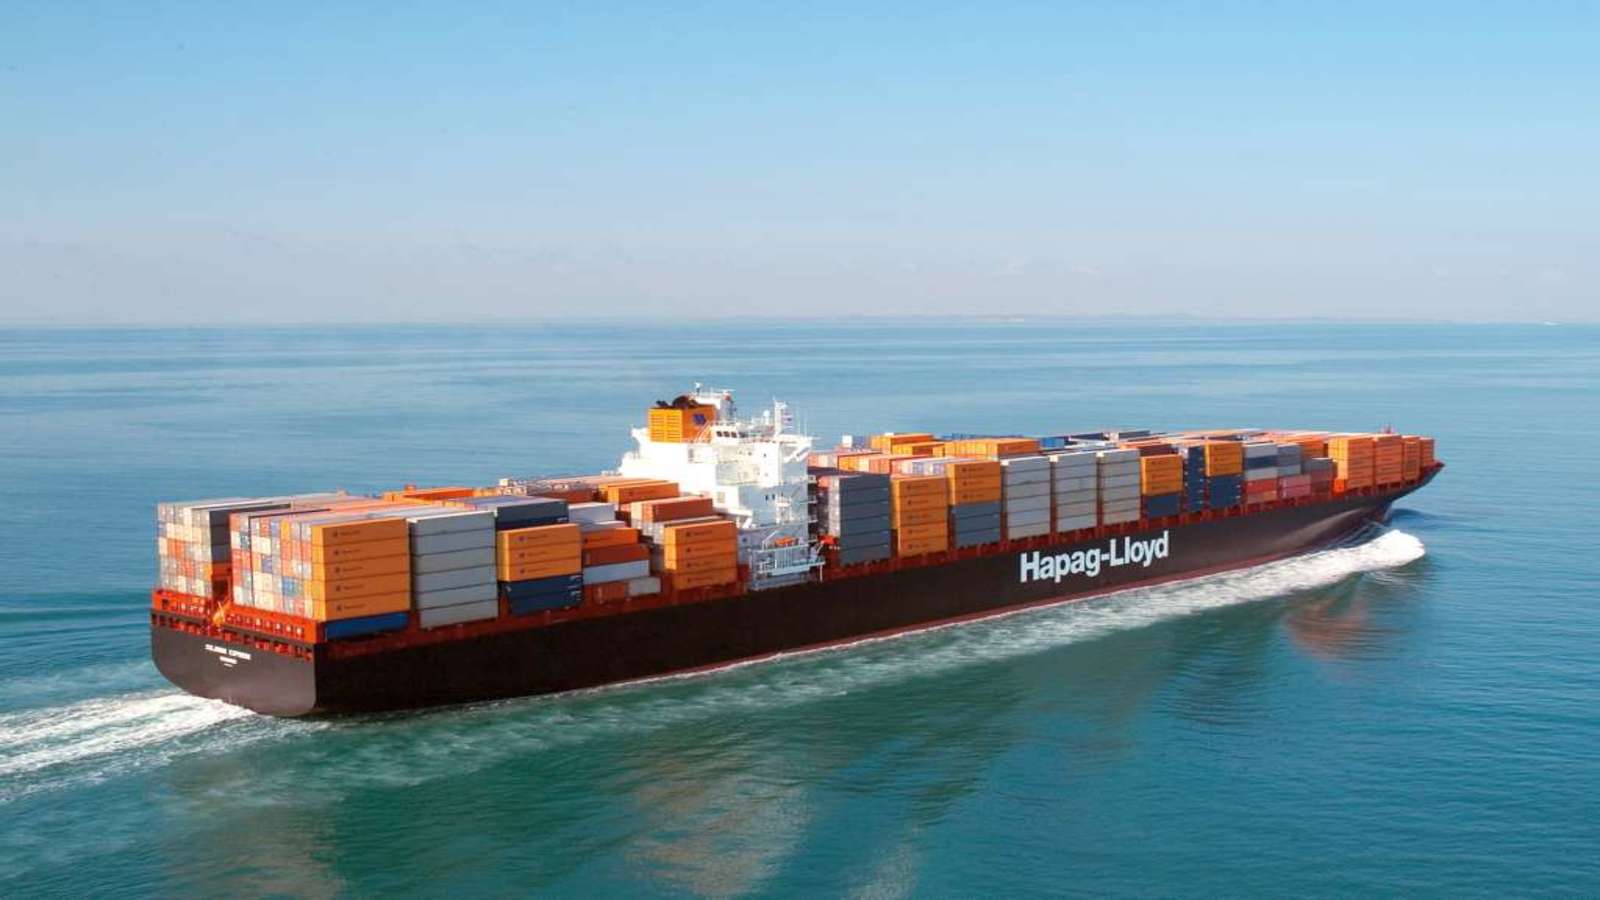 Global shipping company Hapag-Lloyd expands presence in Africa, opens office in Kenya